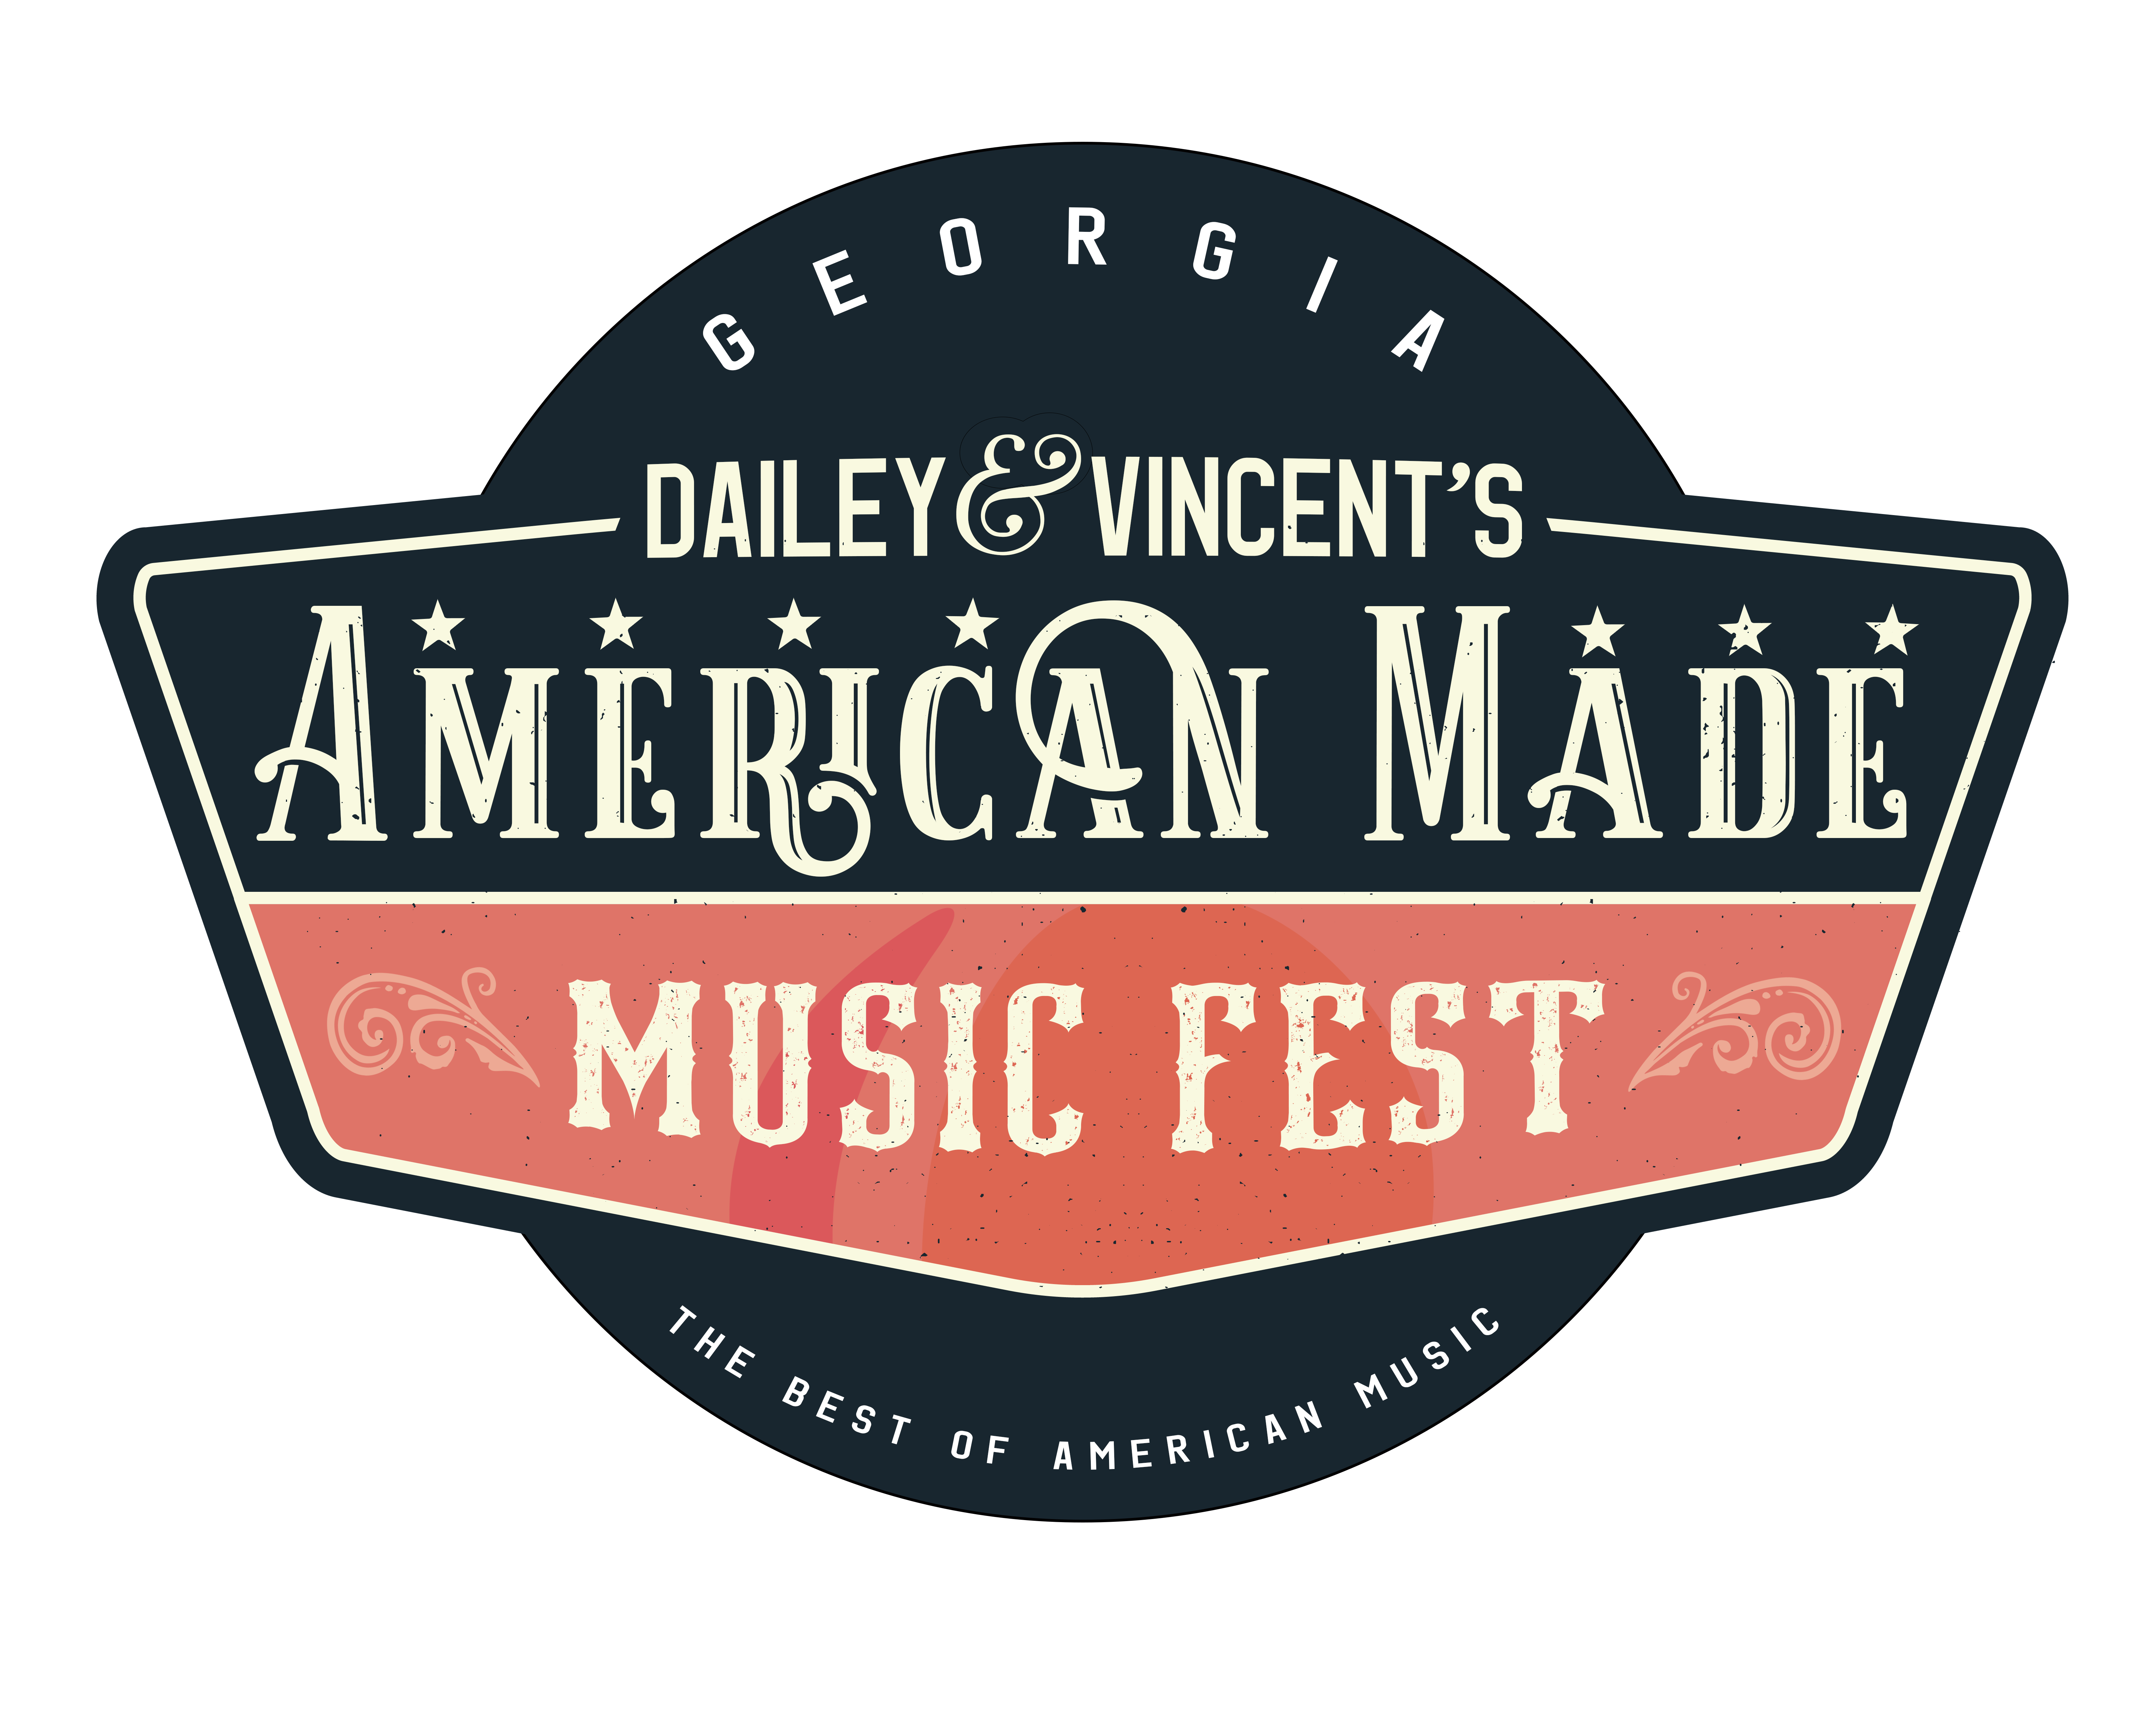 Dailey & Vincent's American Made Music Fest